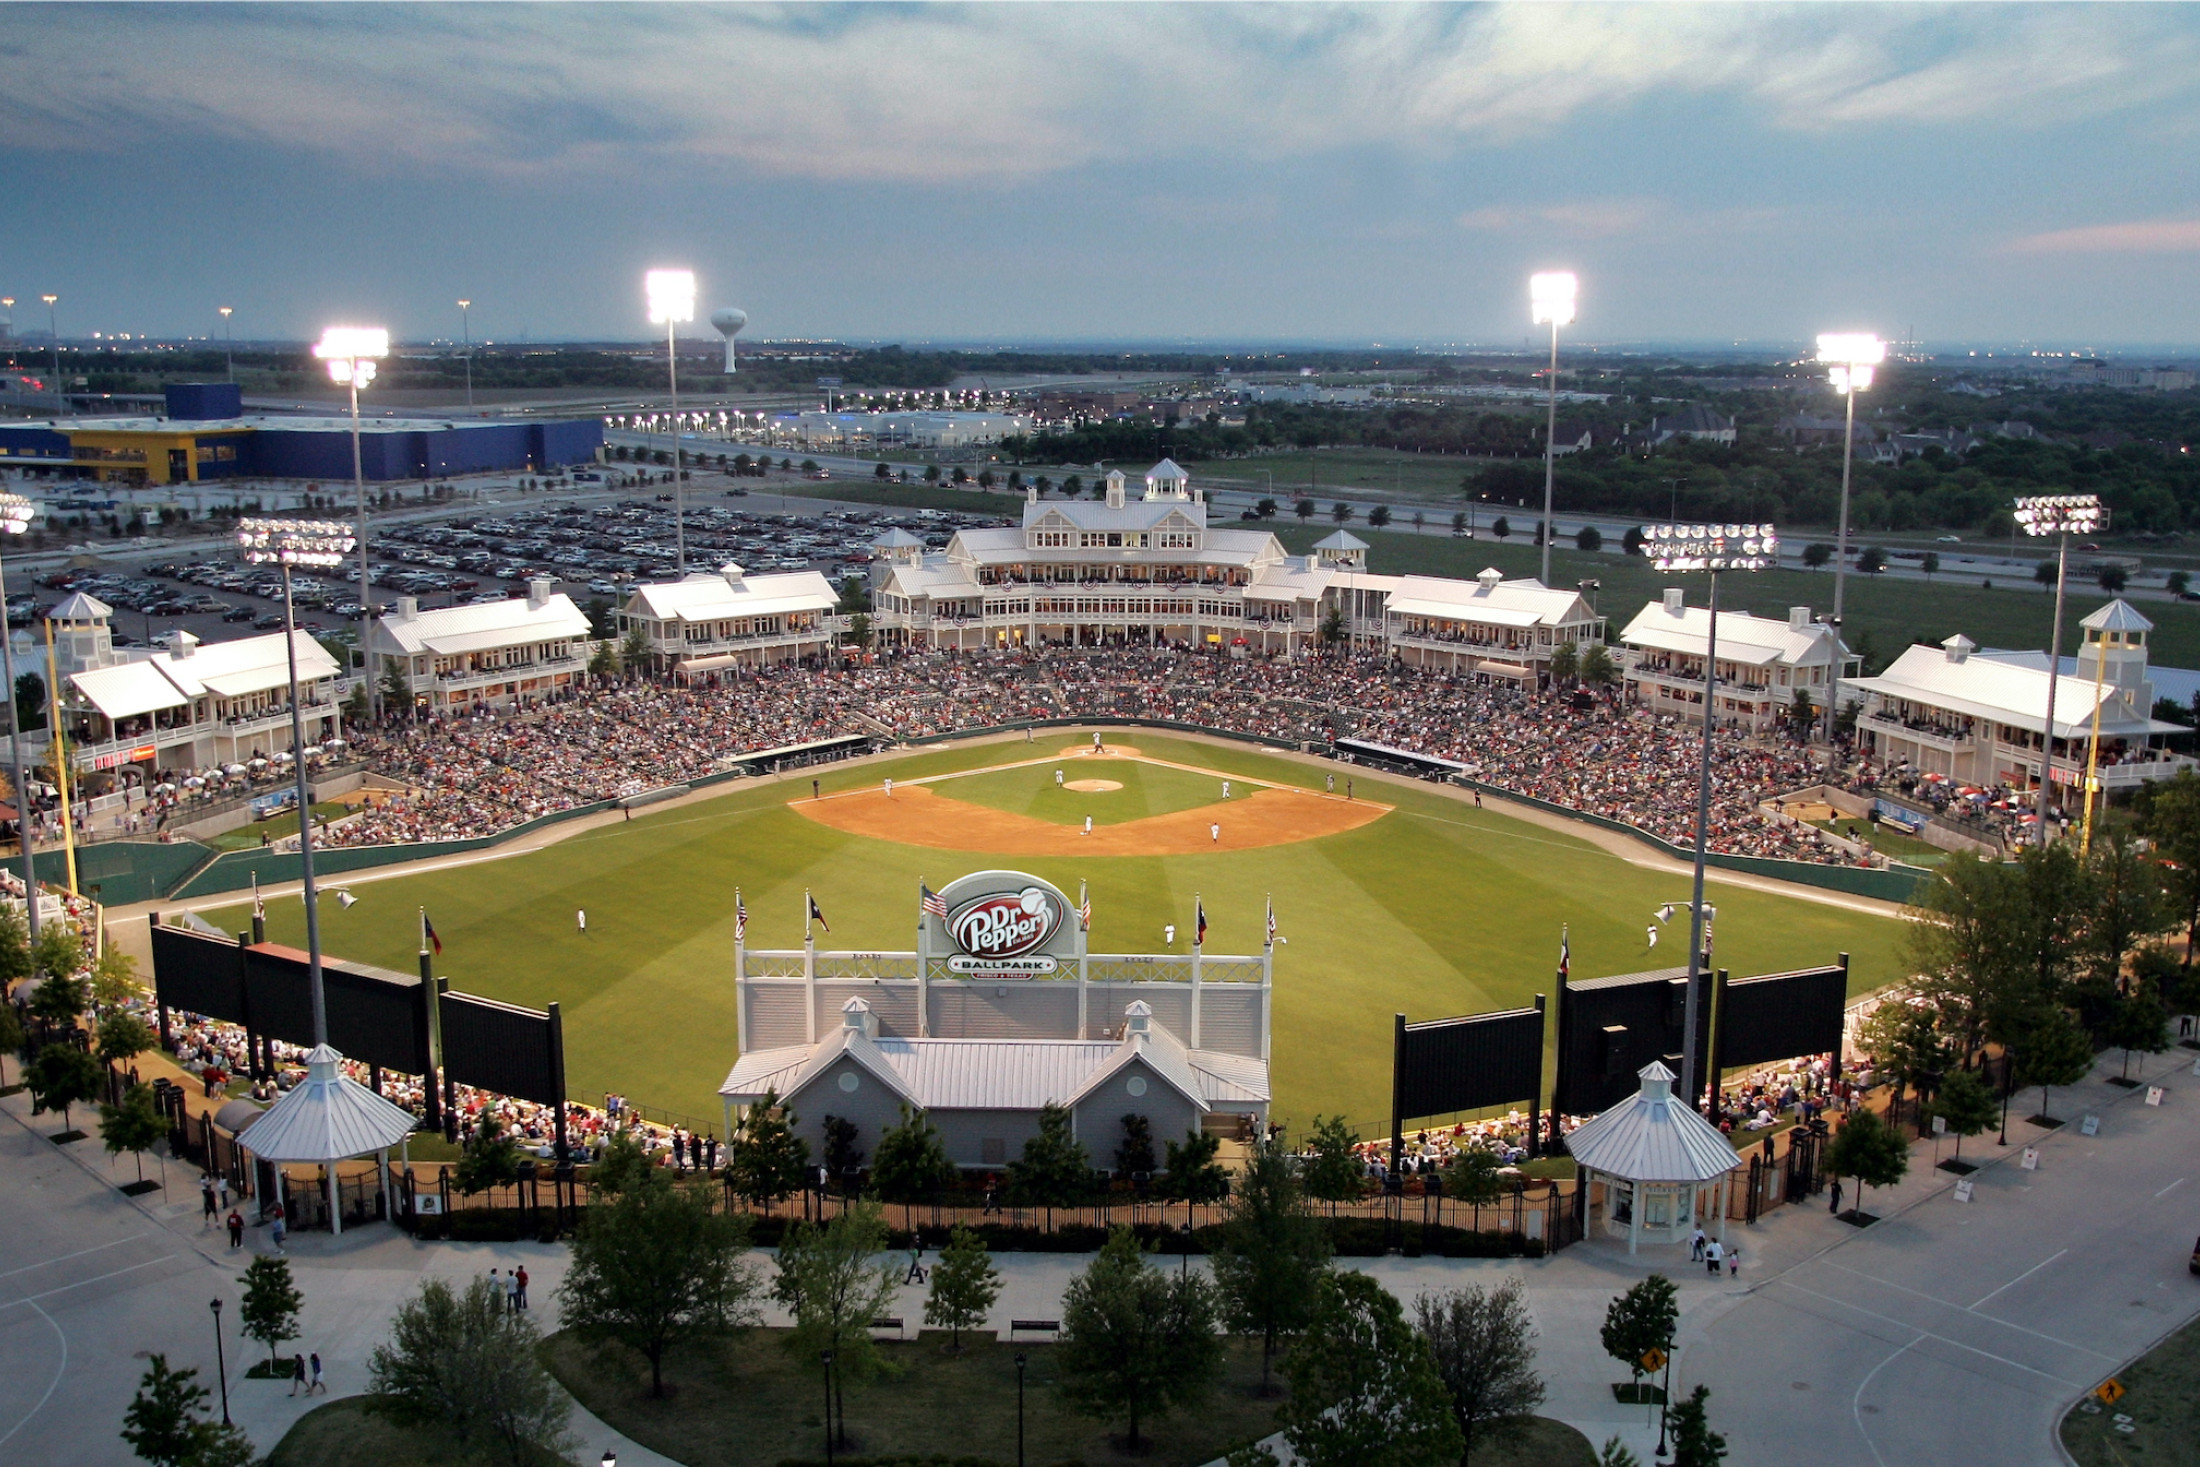 Aerial photo of Dr Pepper Ballpark from the outfield